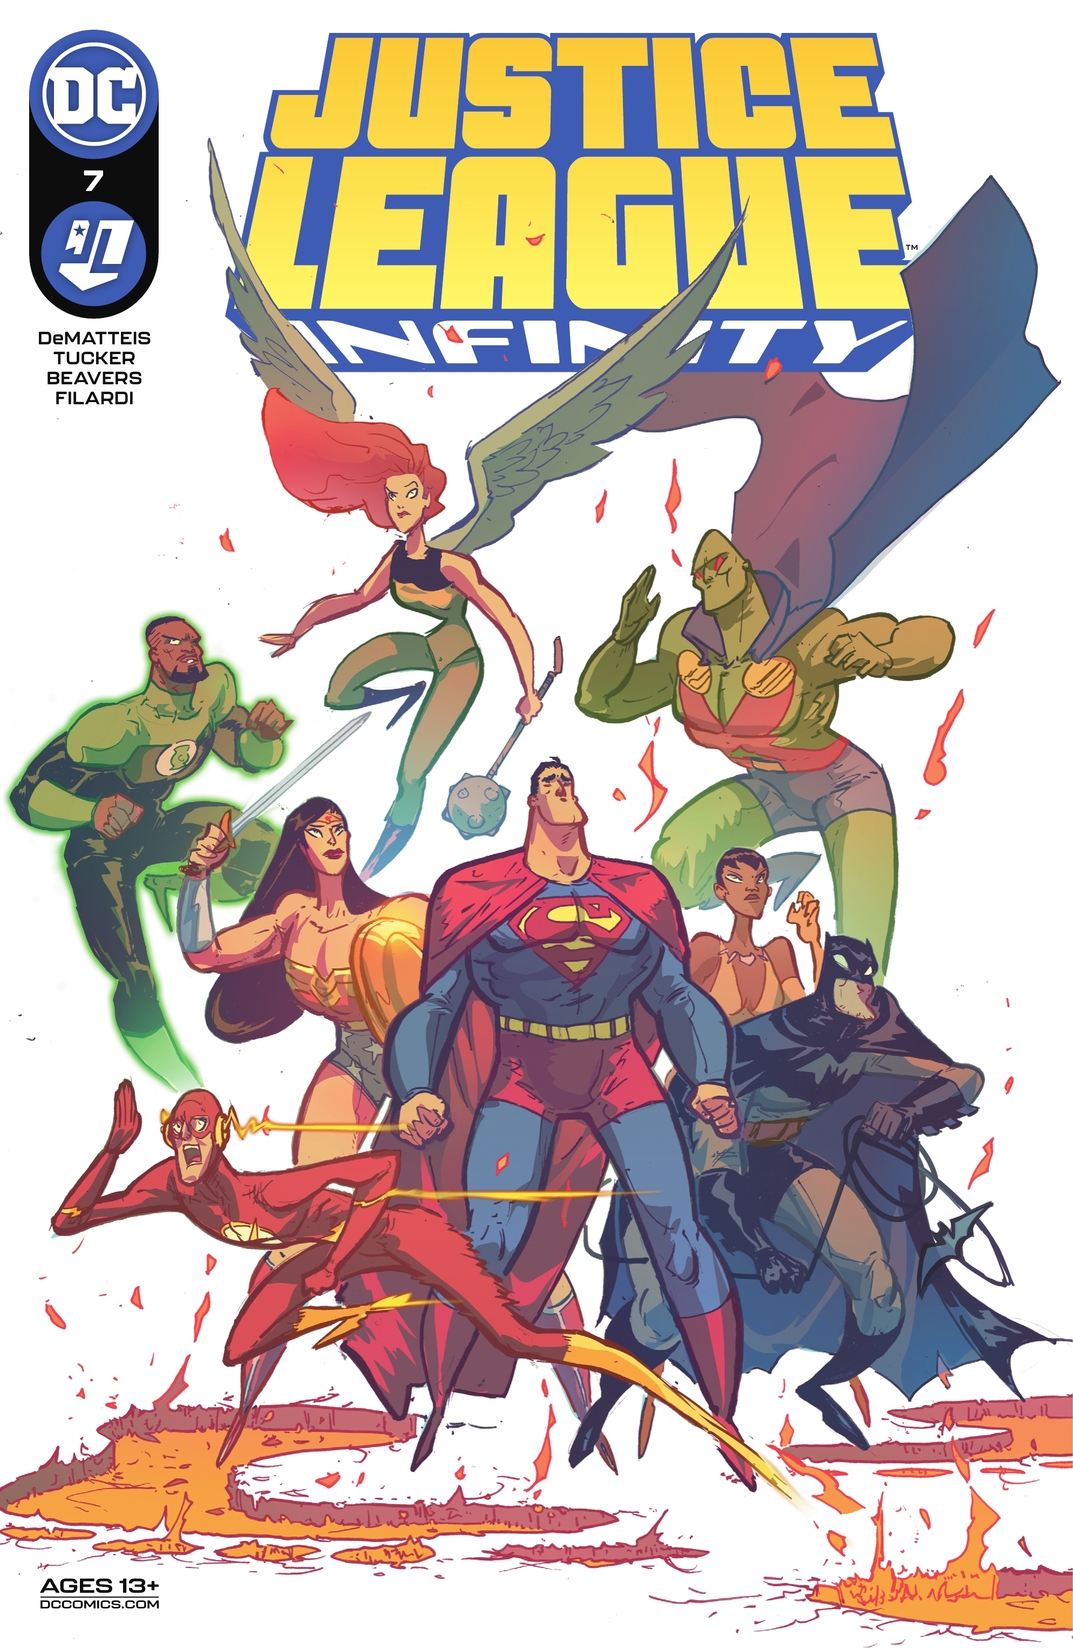 Justice League Infinity #7 preview images